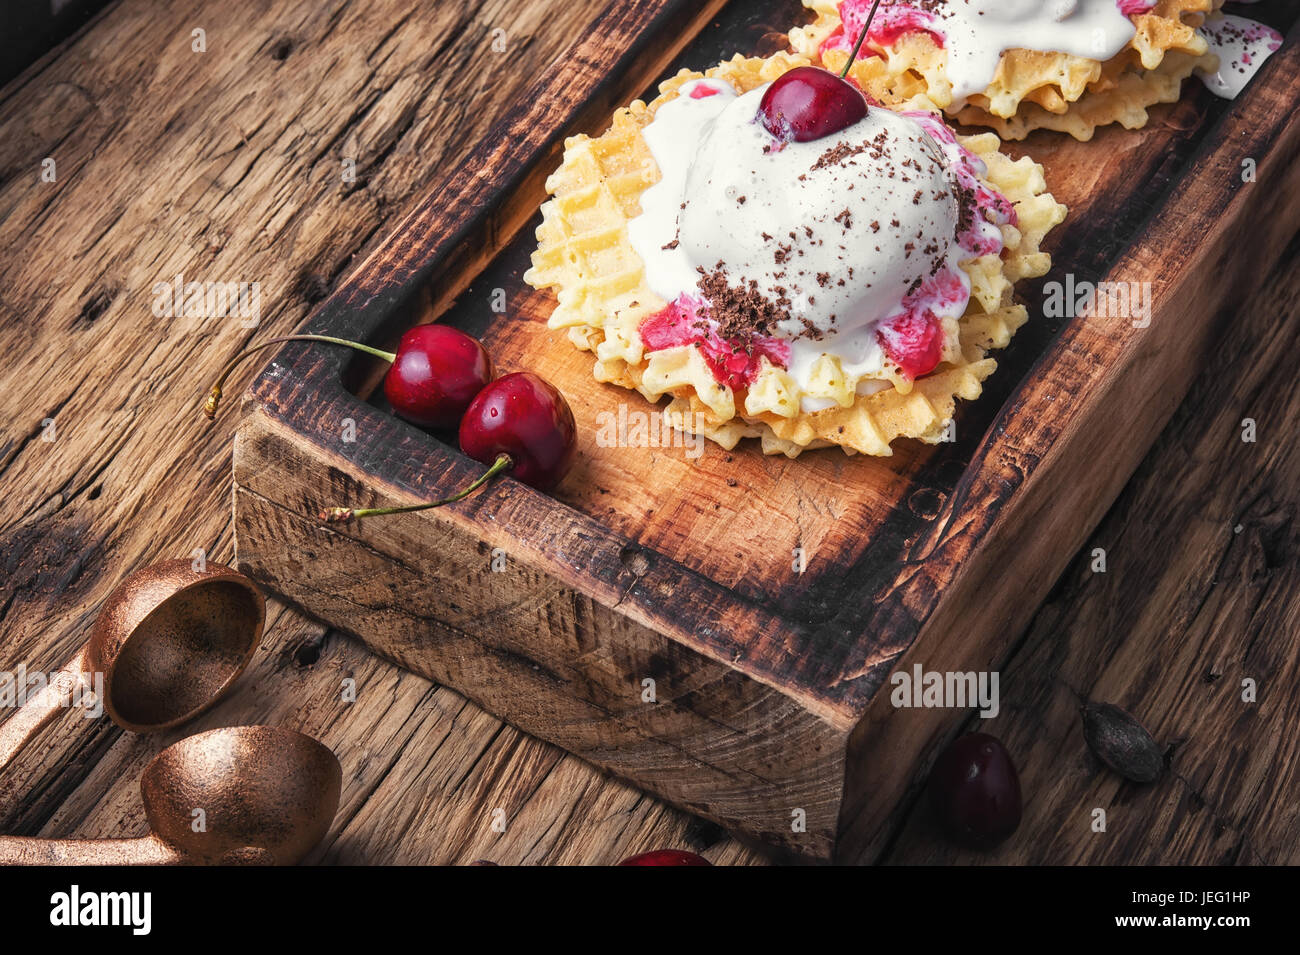 Ice cream on baked wafers with cherries Stock Photo